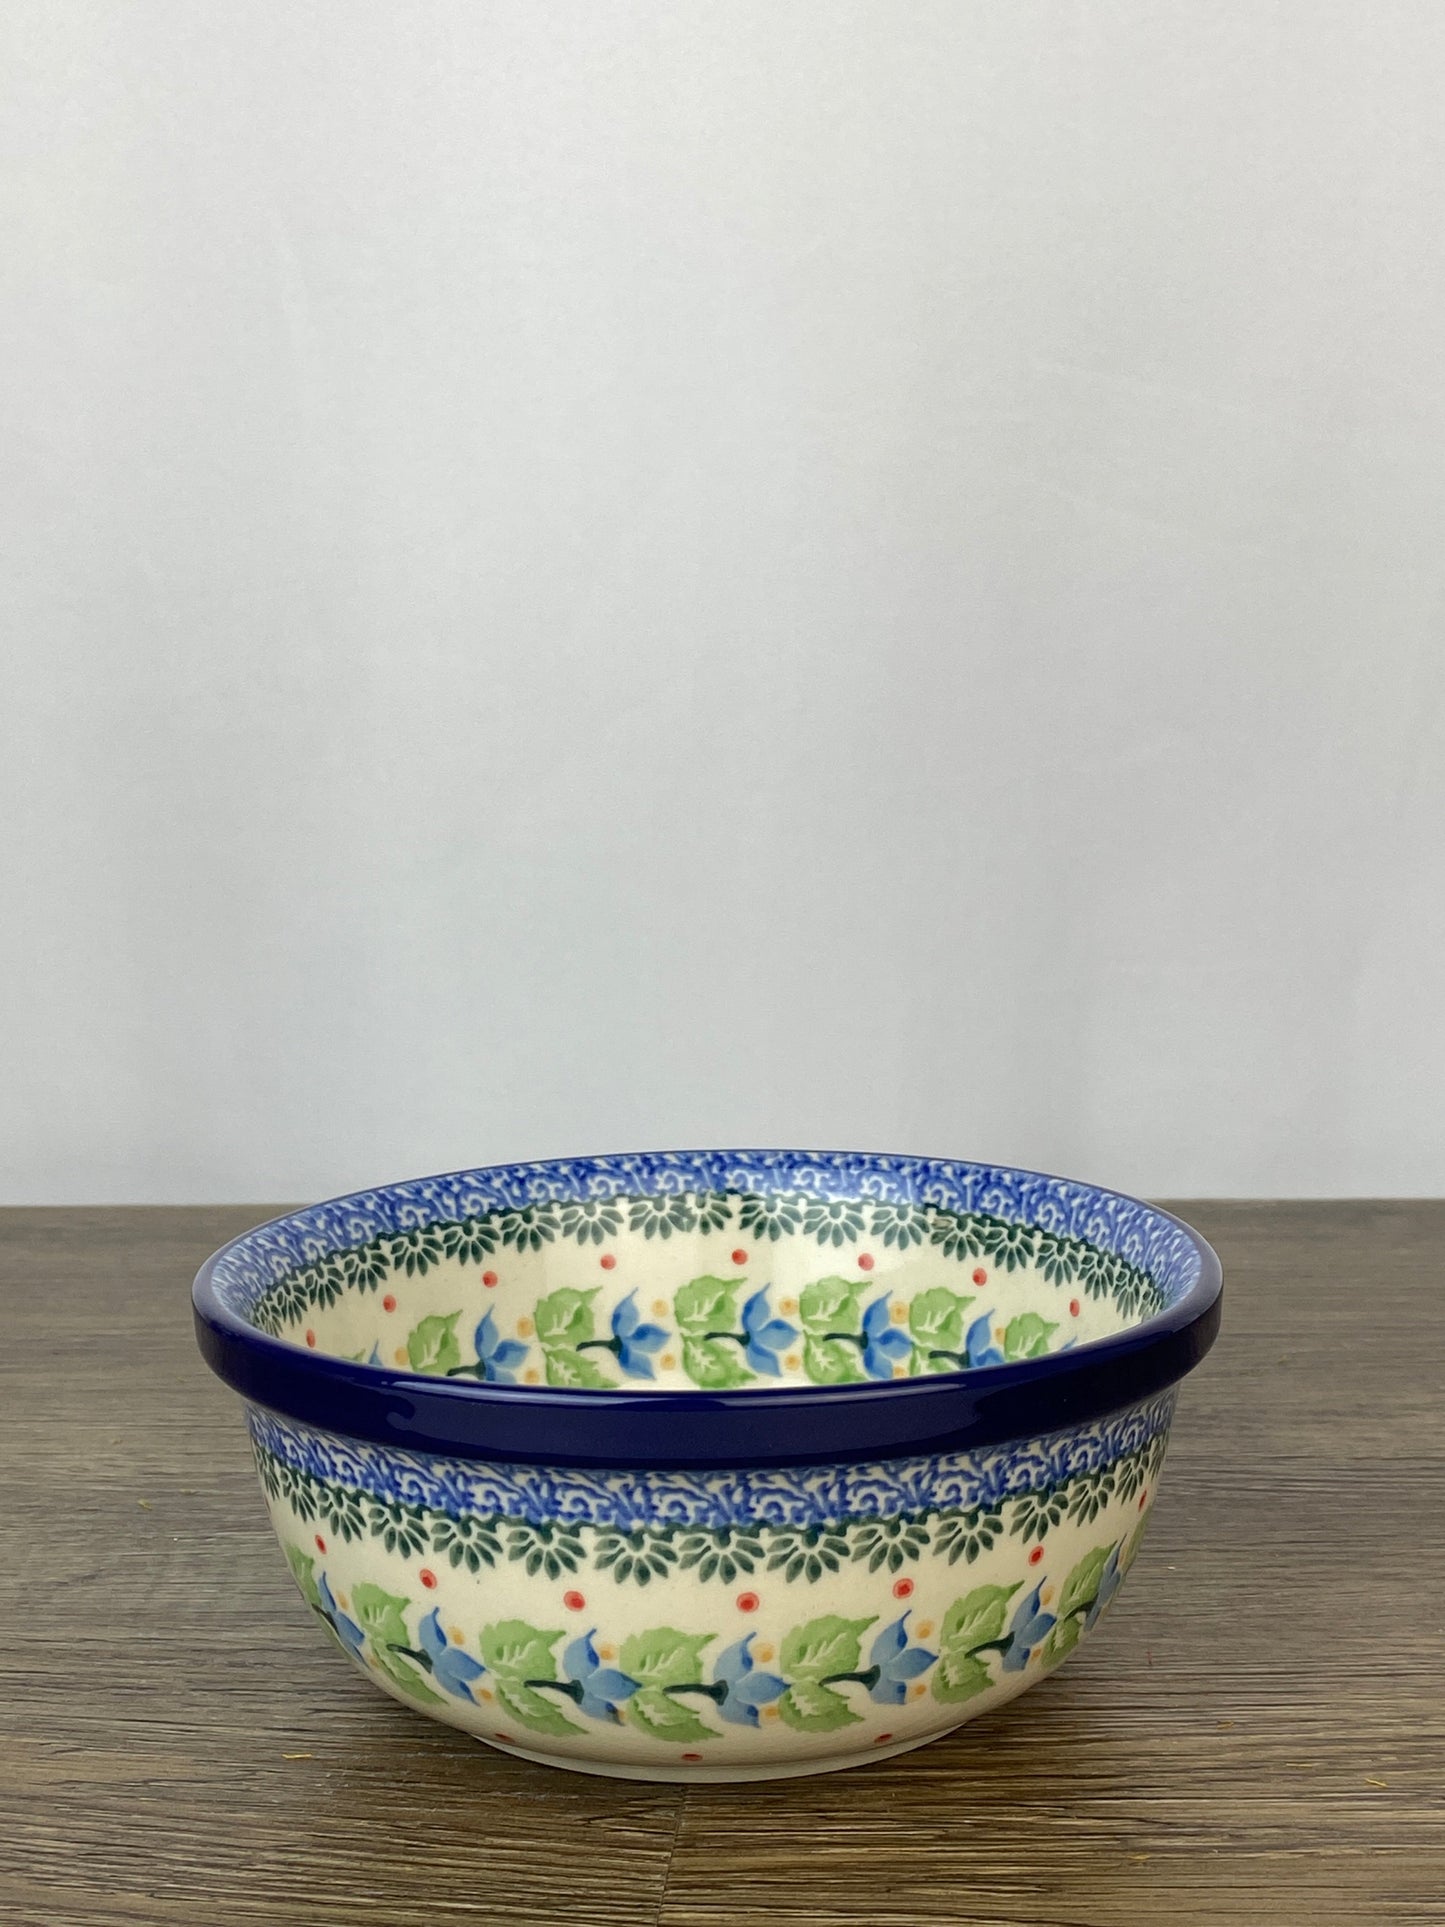 SALE Cereal / Berry Bowl - Shape 209 - Pattern 2732